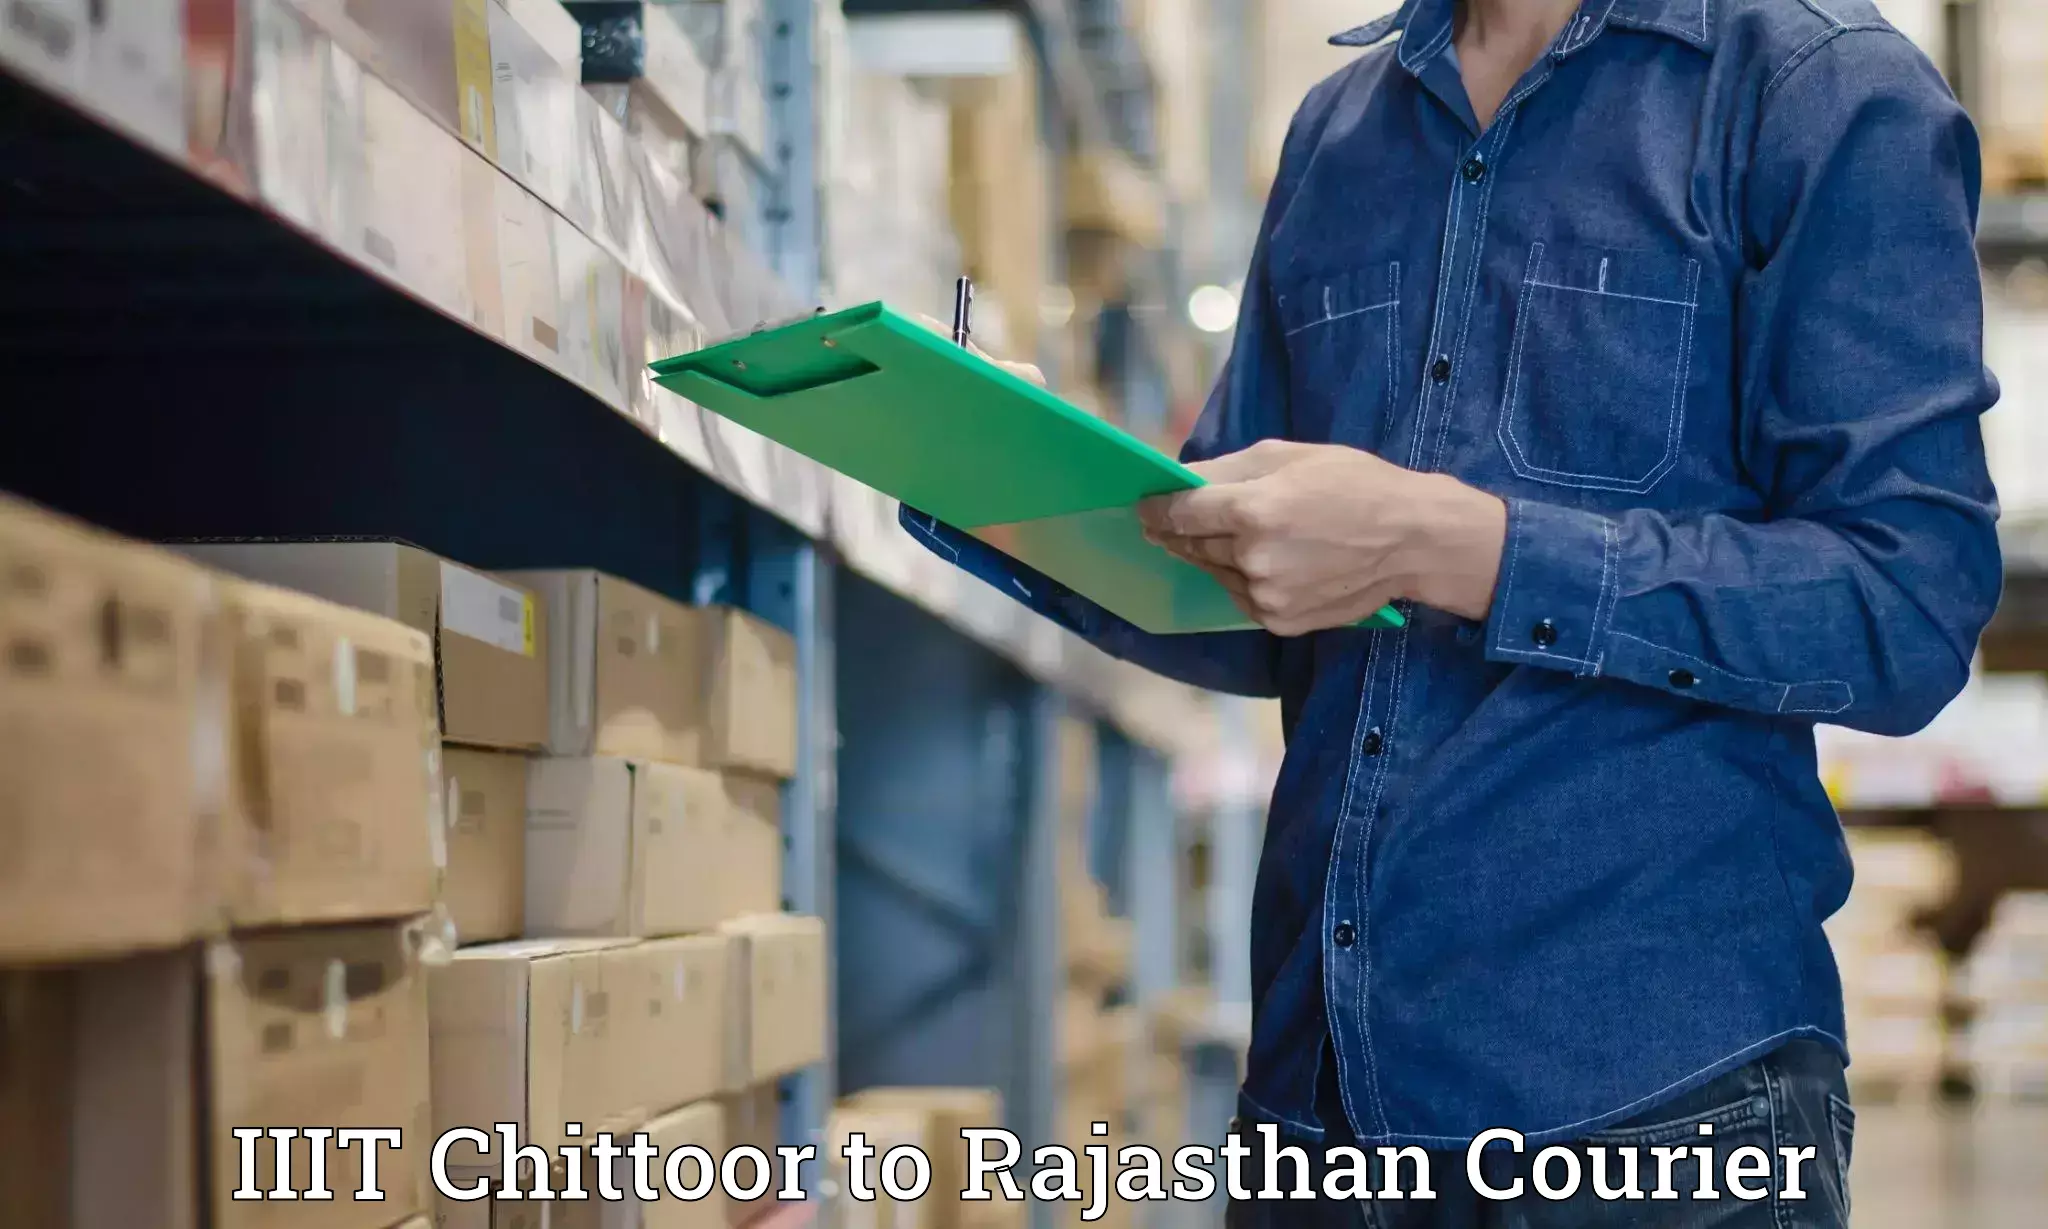 Local courier options IIIT Chittoor to Nainwa